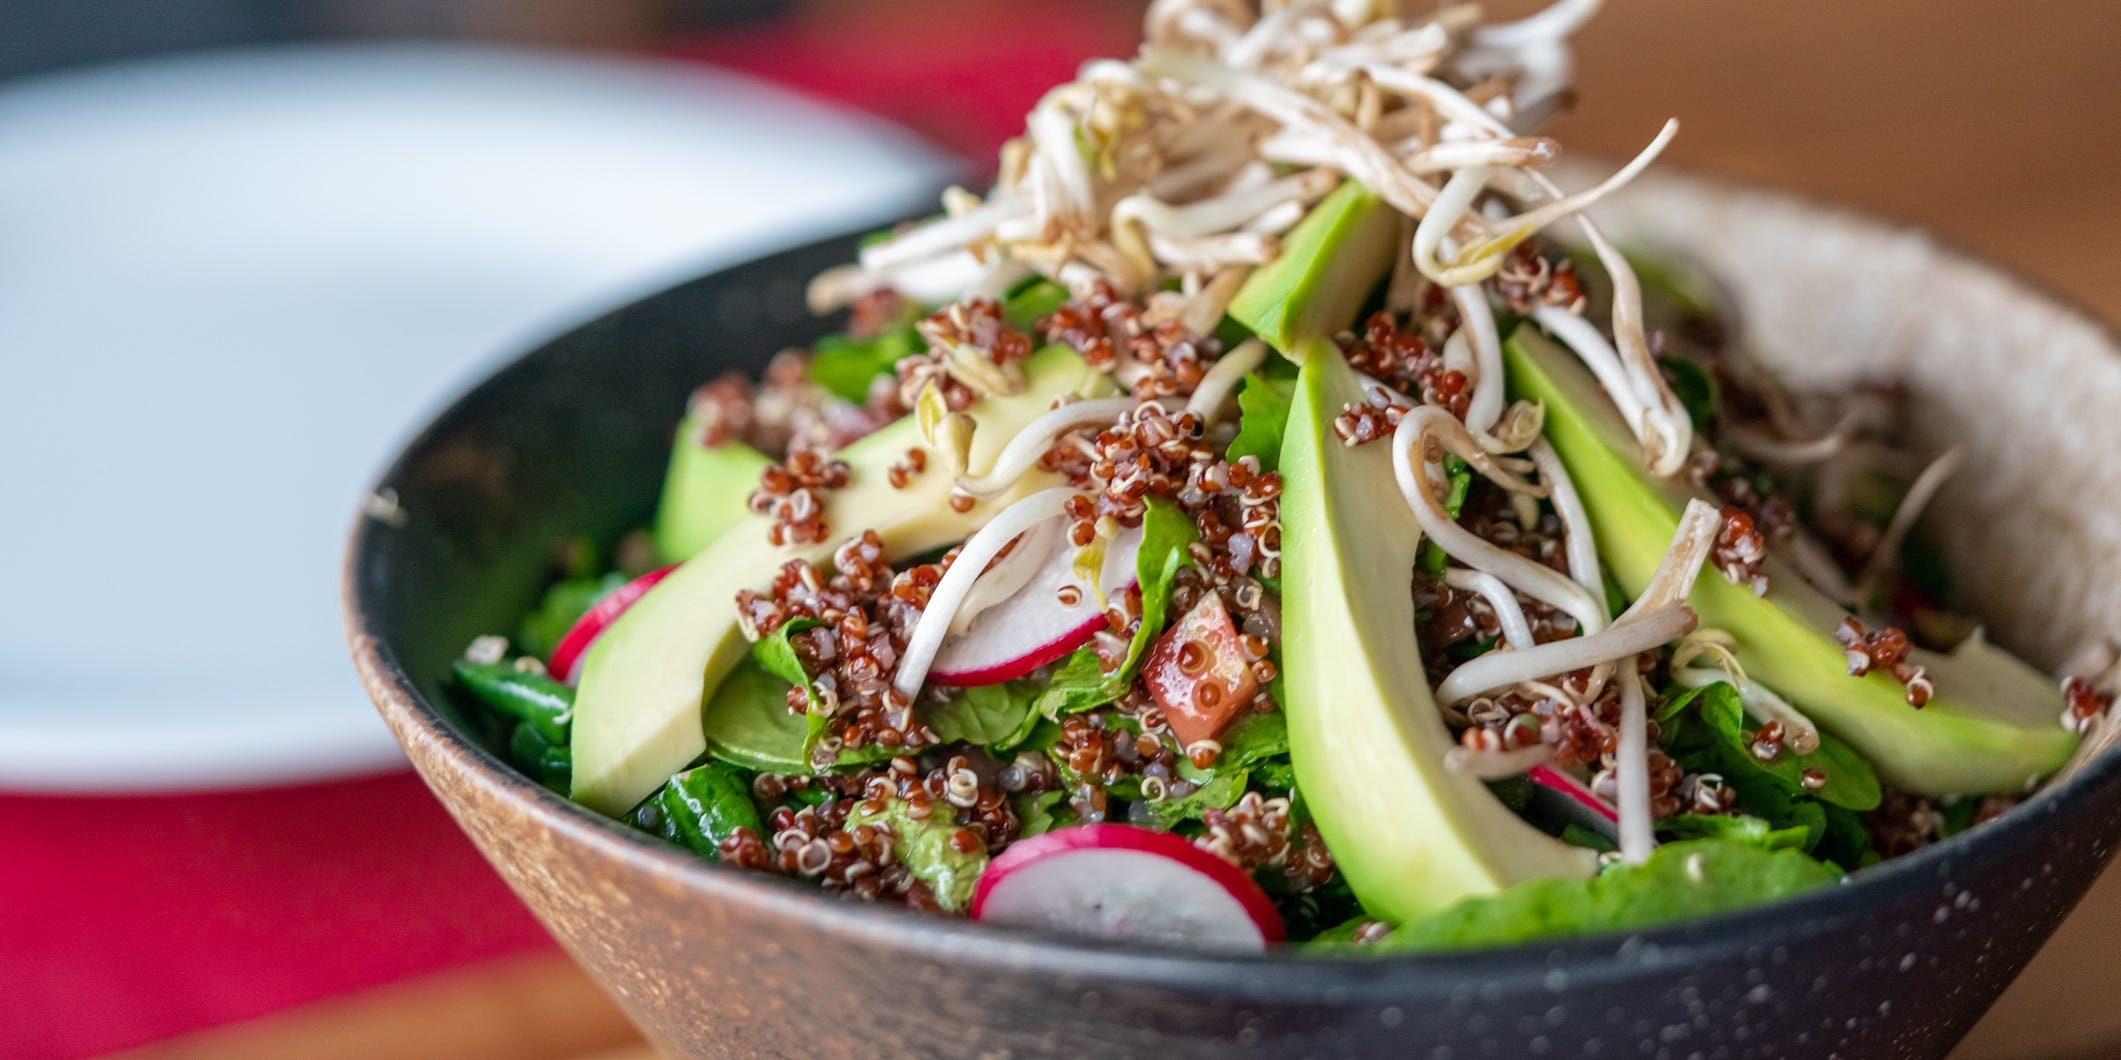 A vegetable bowl of quinoa, avocado, sprouts, and radishes.